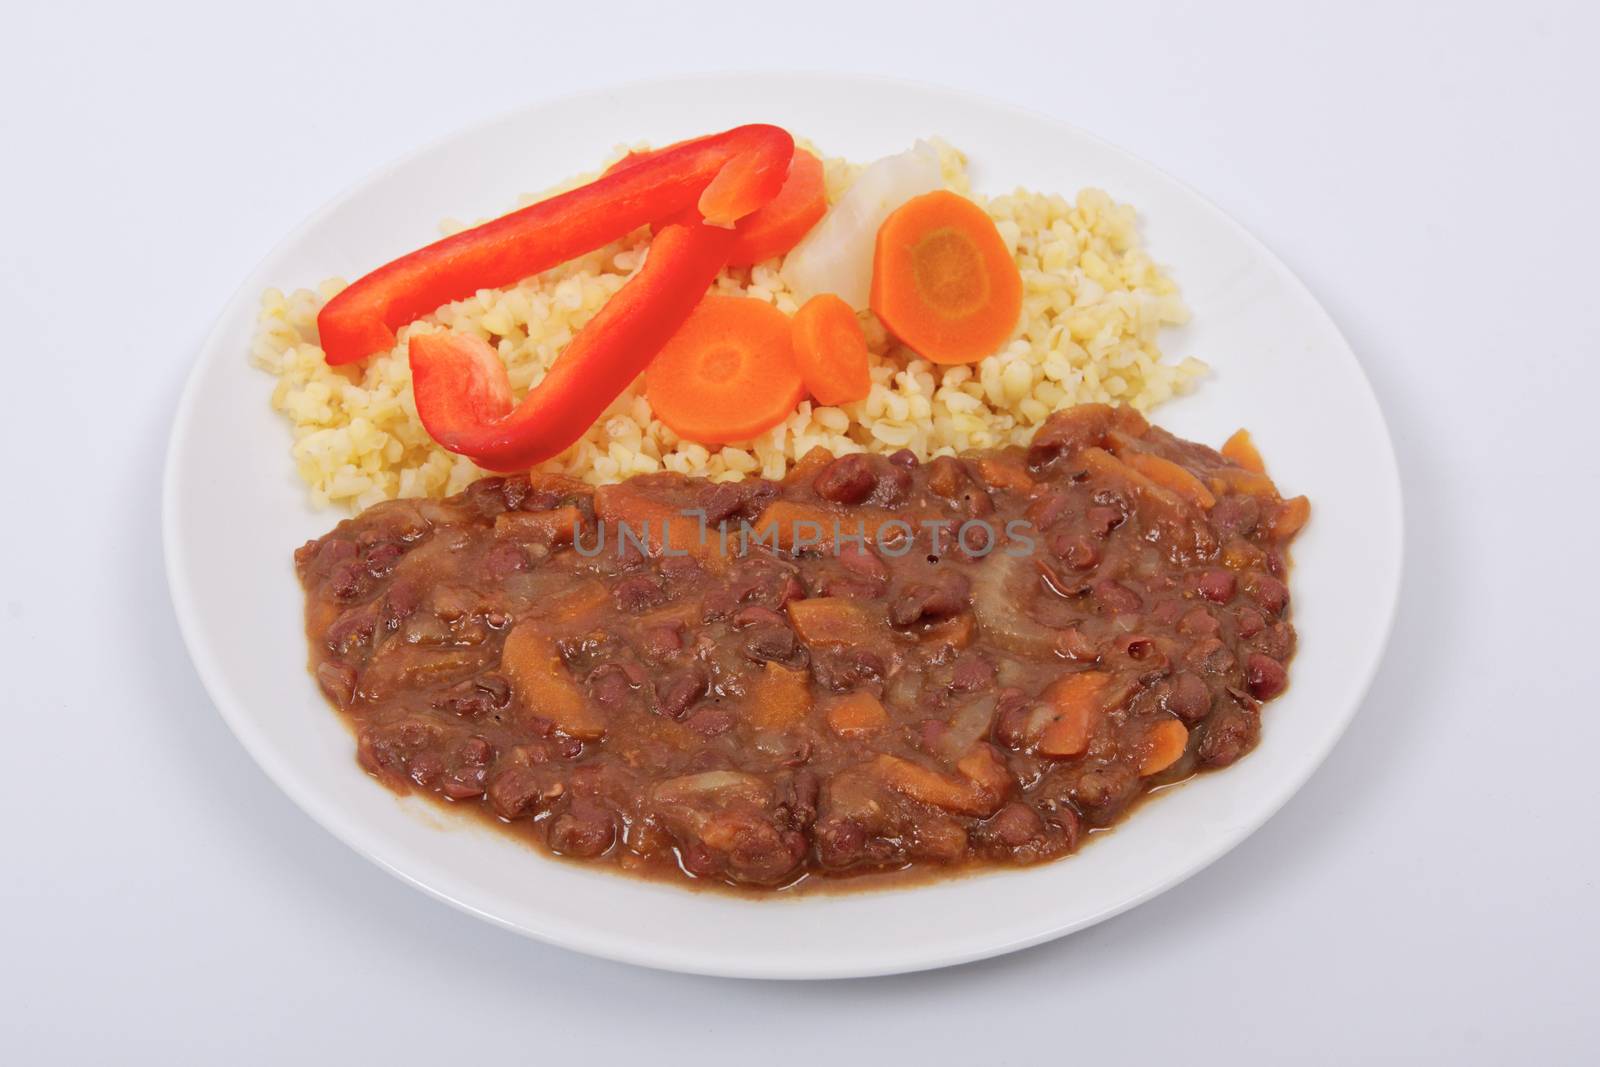 Azuki with vegetables on steam and bulgur on a white background